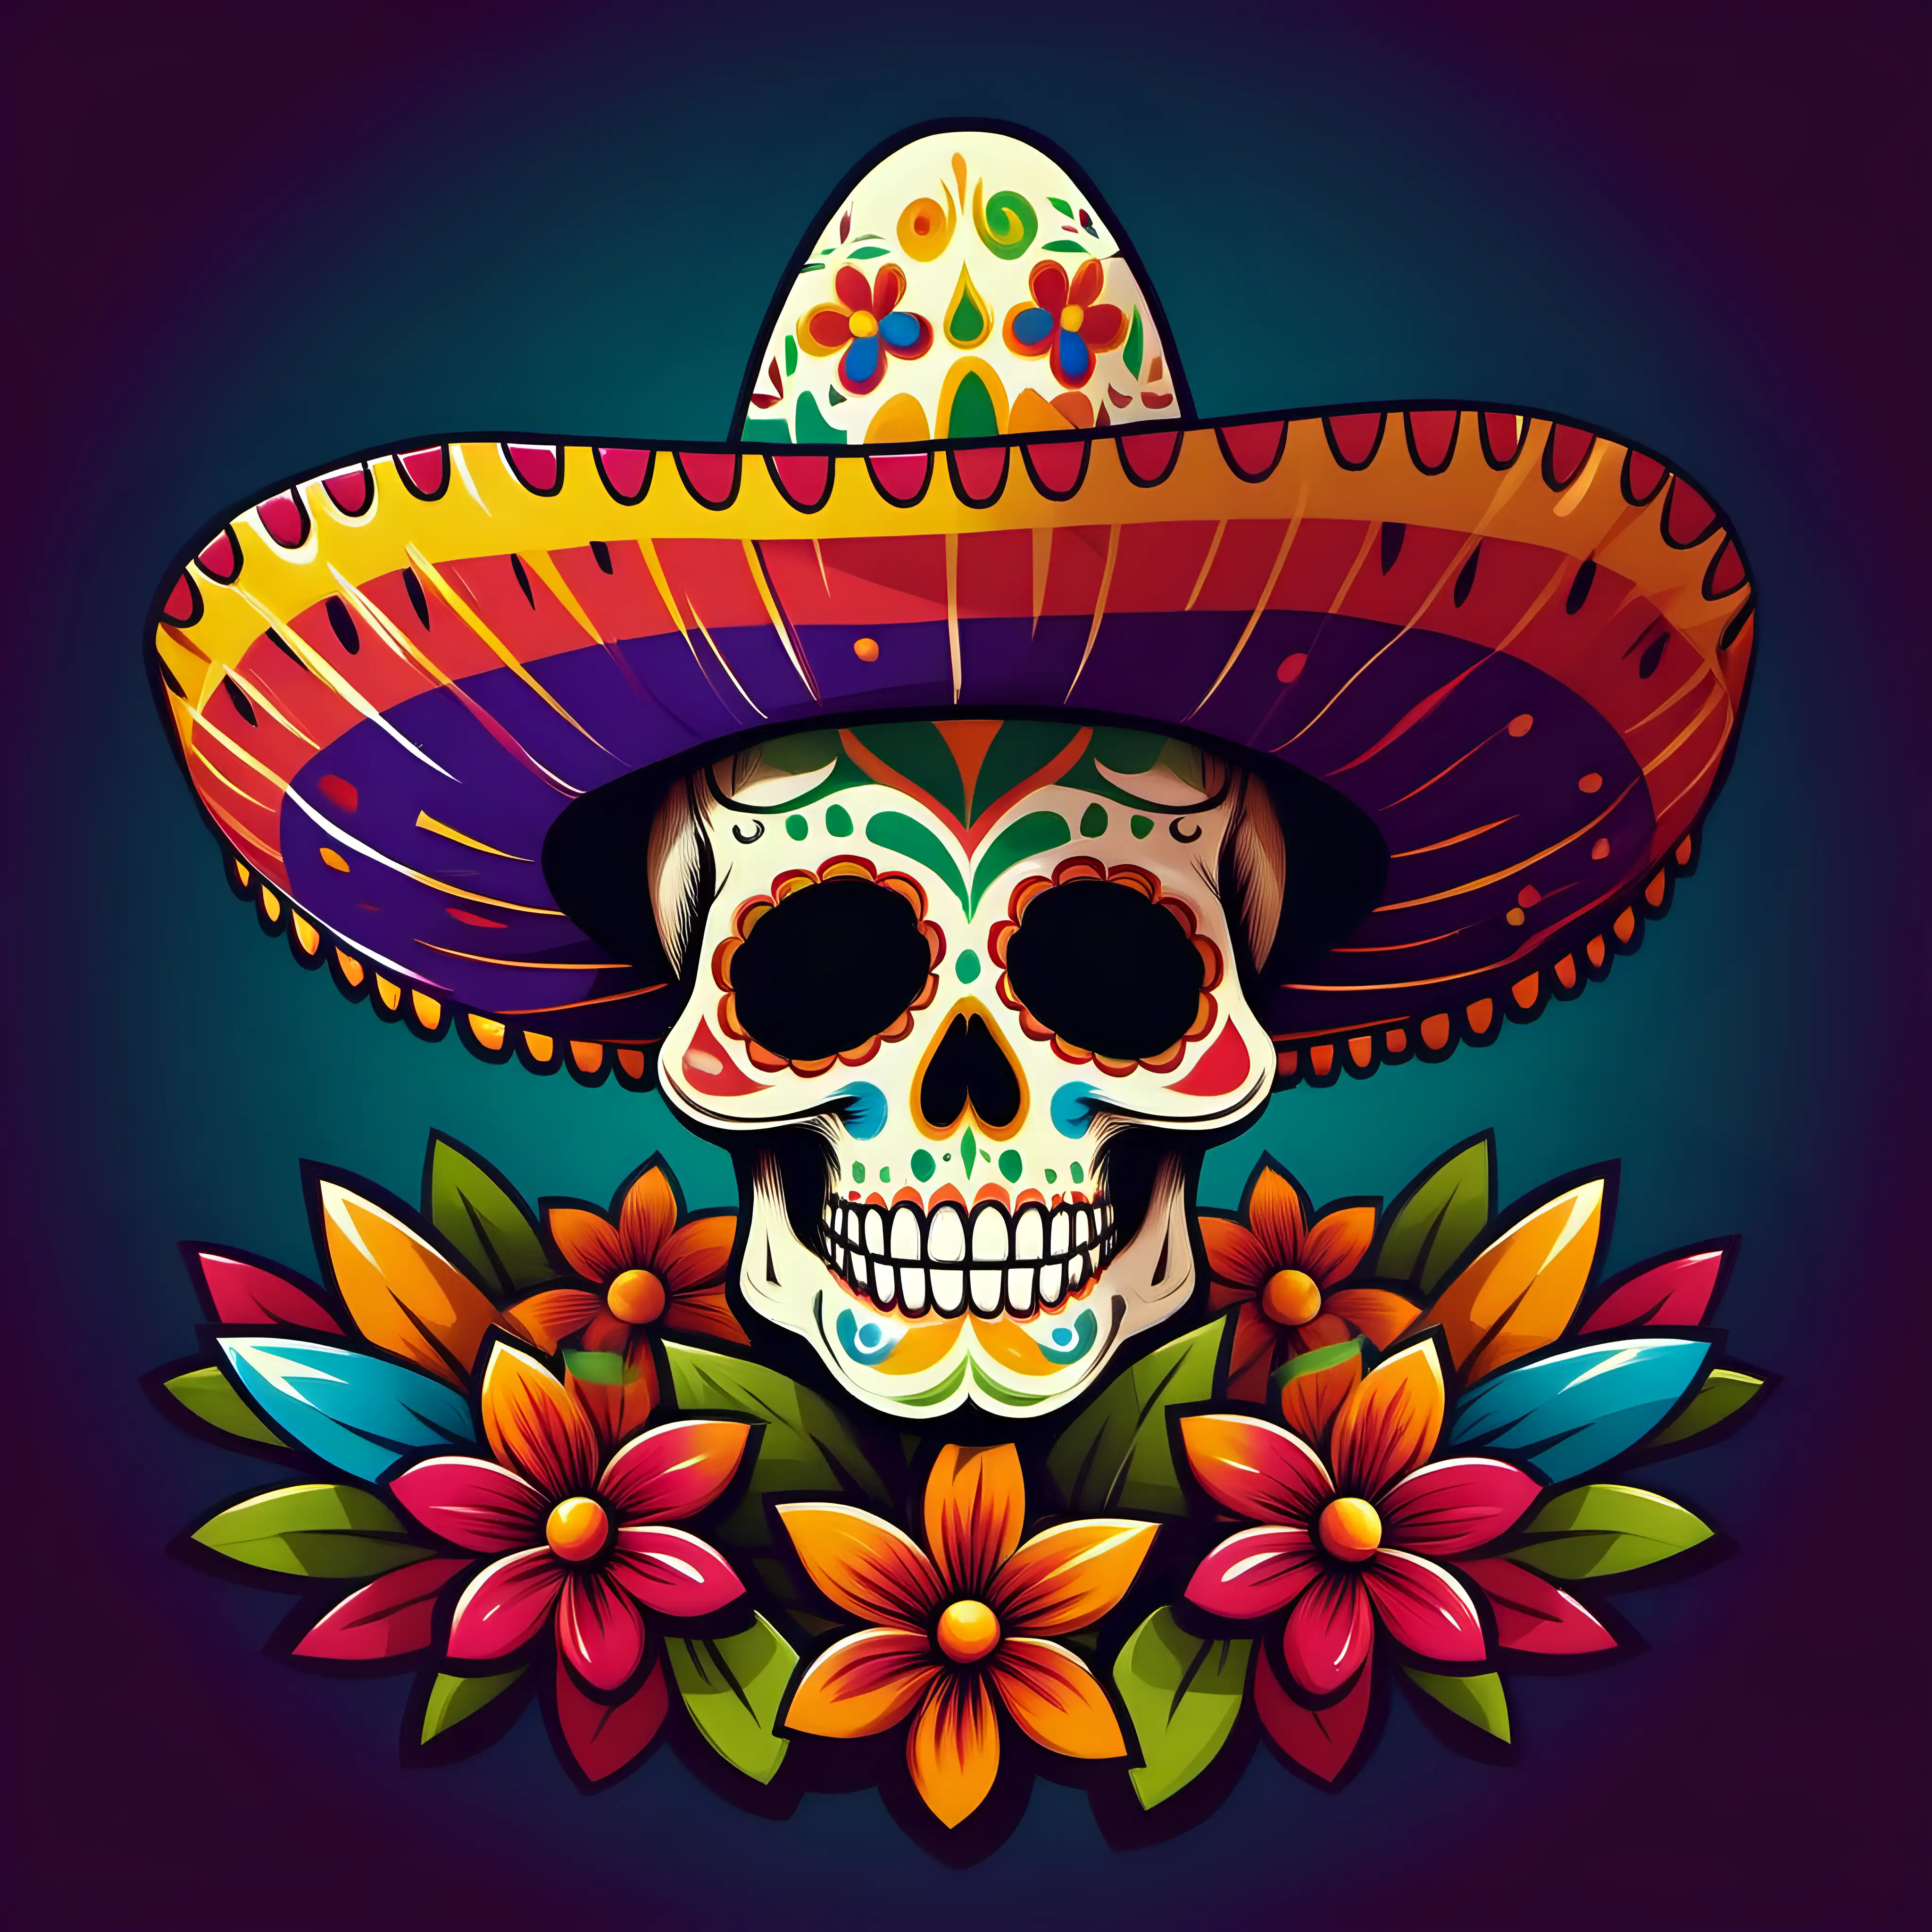 Image of a cinco de Mayo style skull, colorful, no text